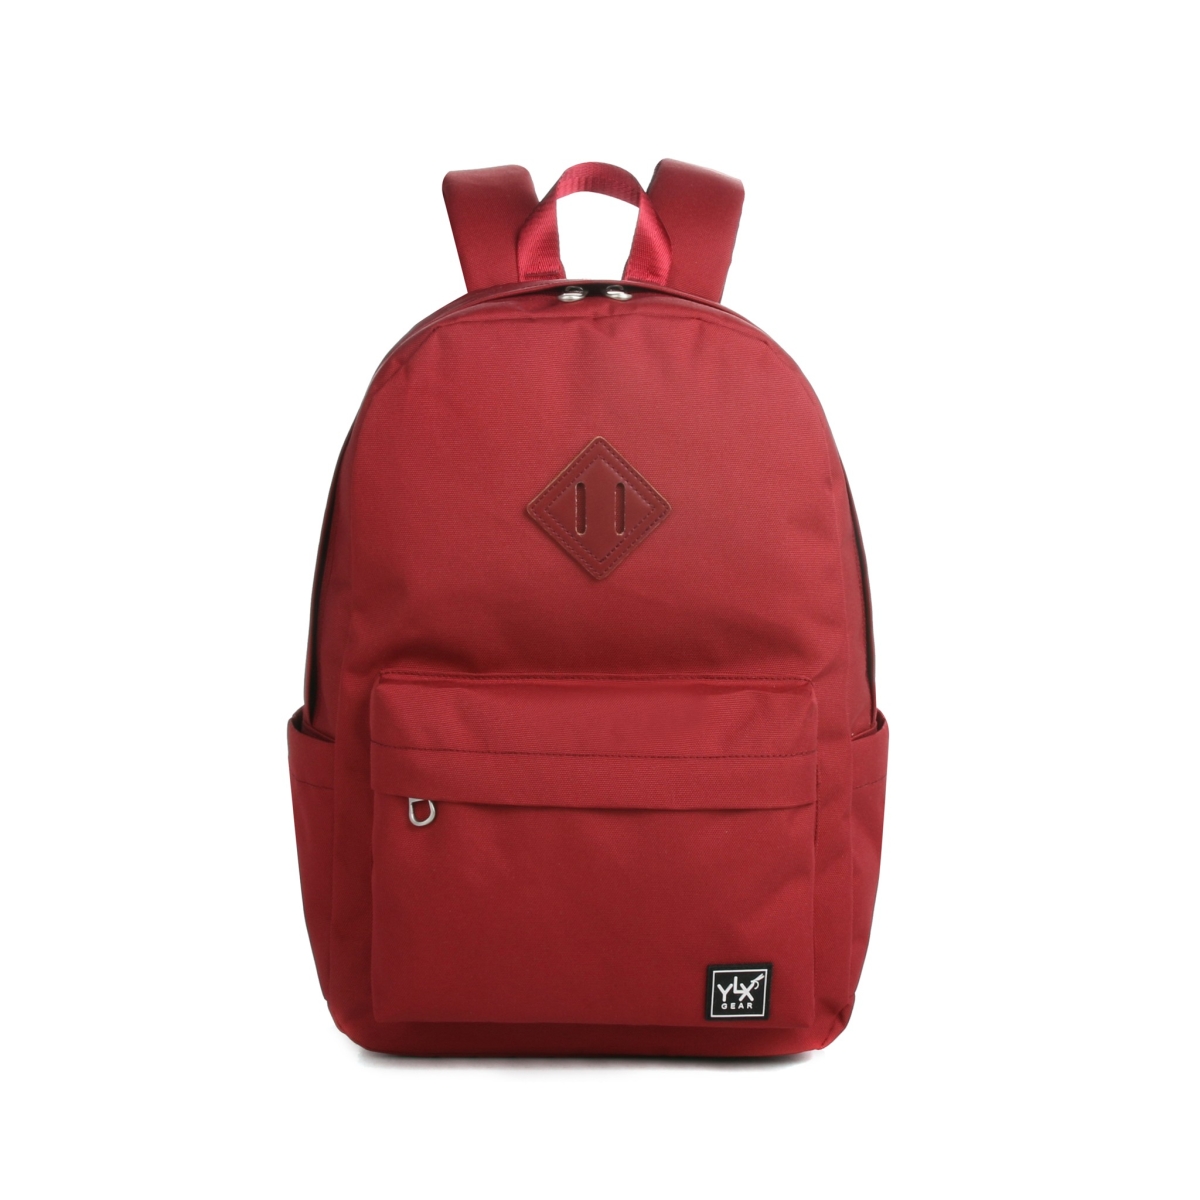 YLX Finch Backpack | Brick Red